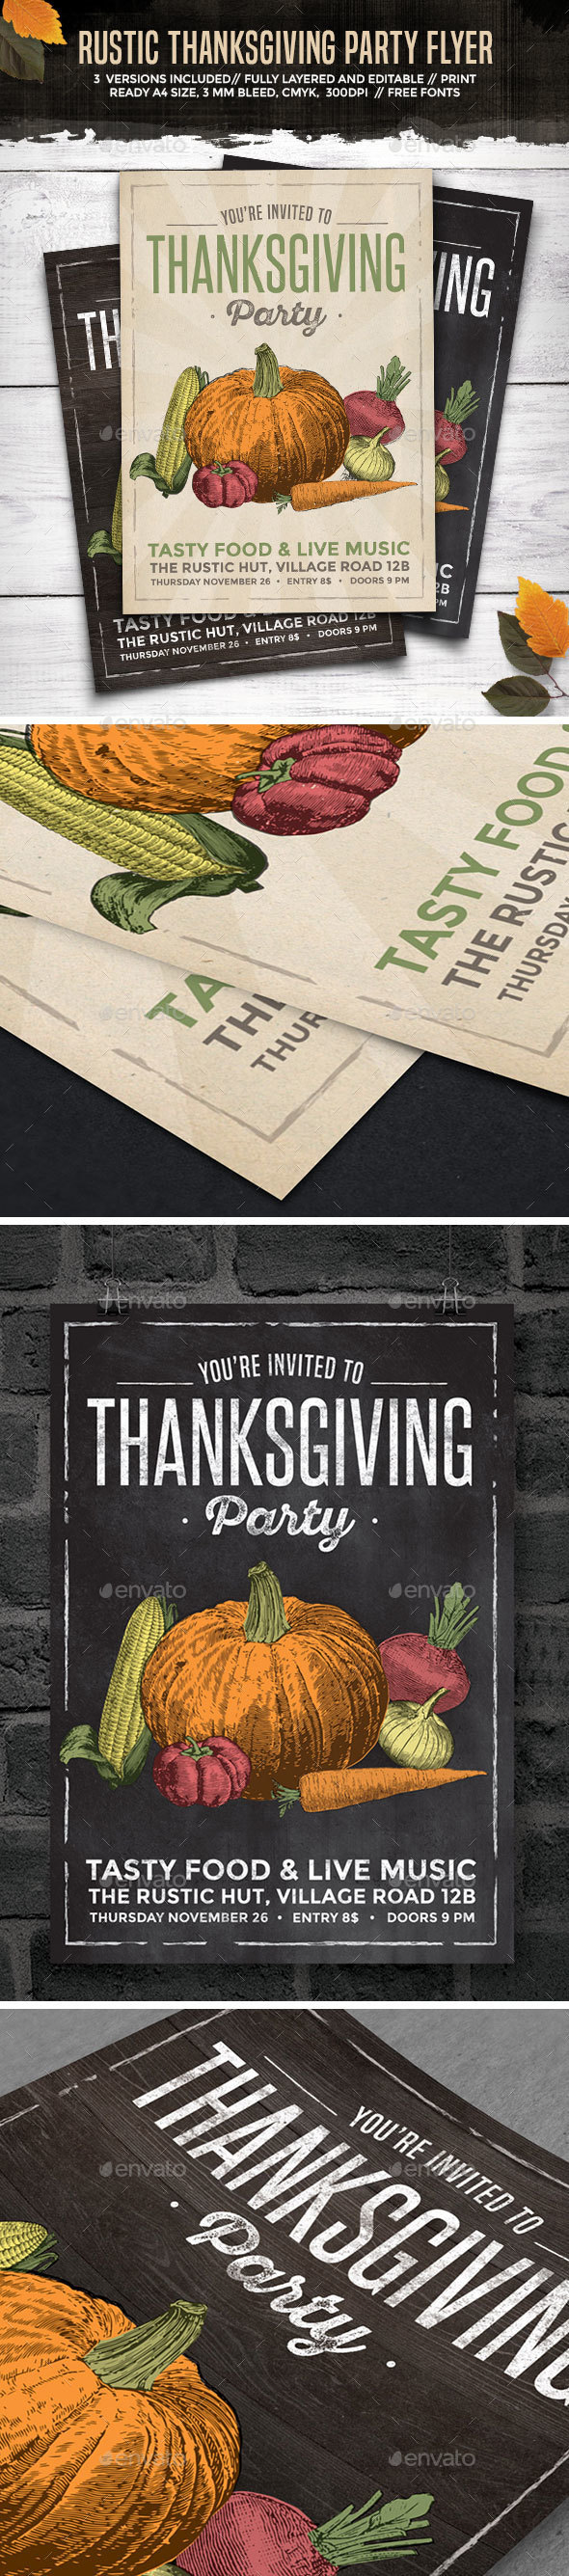 Rustic Thanksgiving Party Flyer